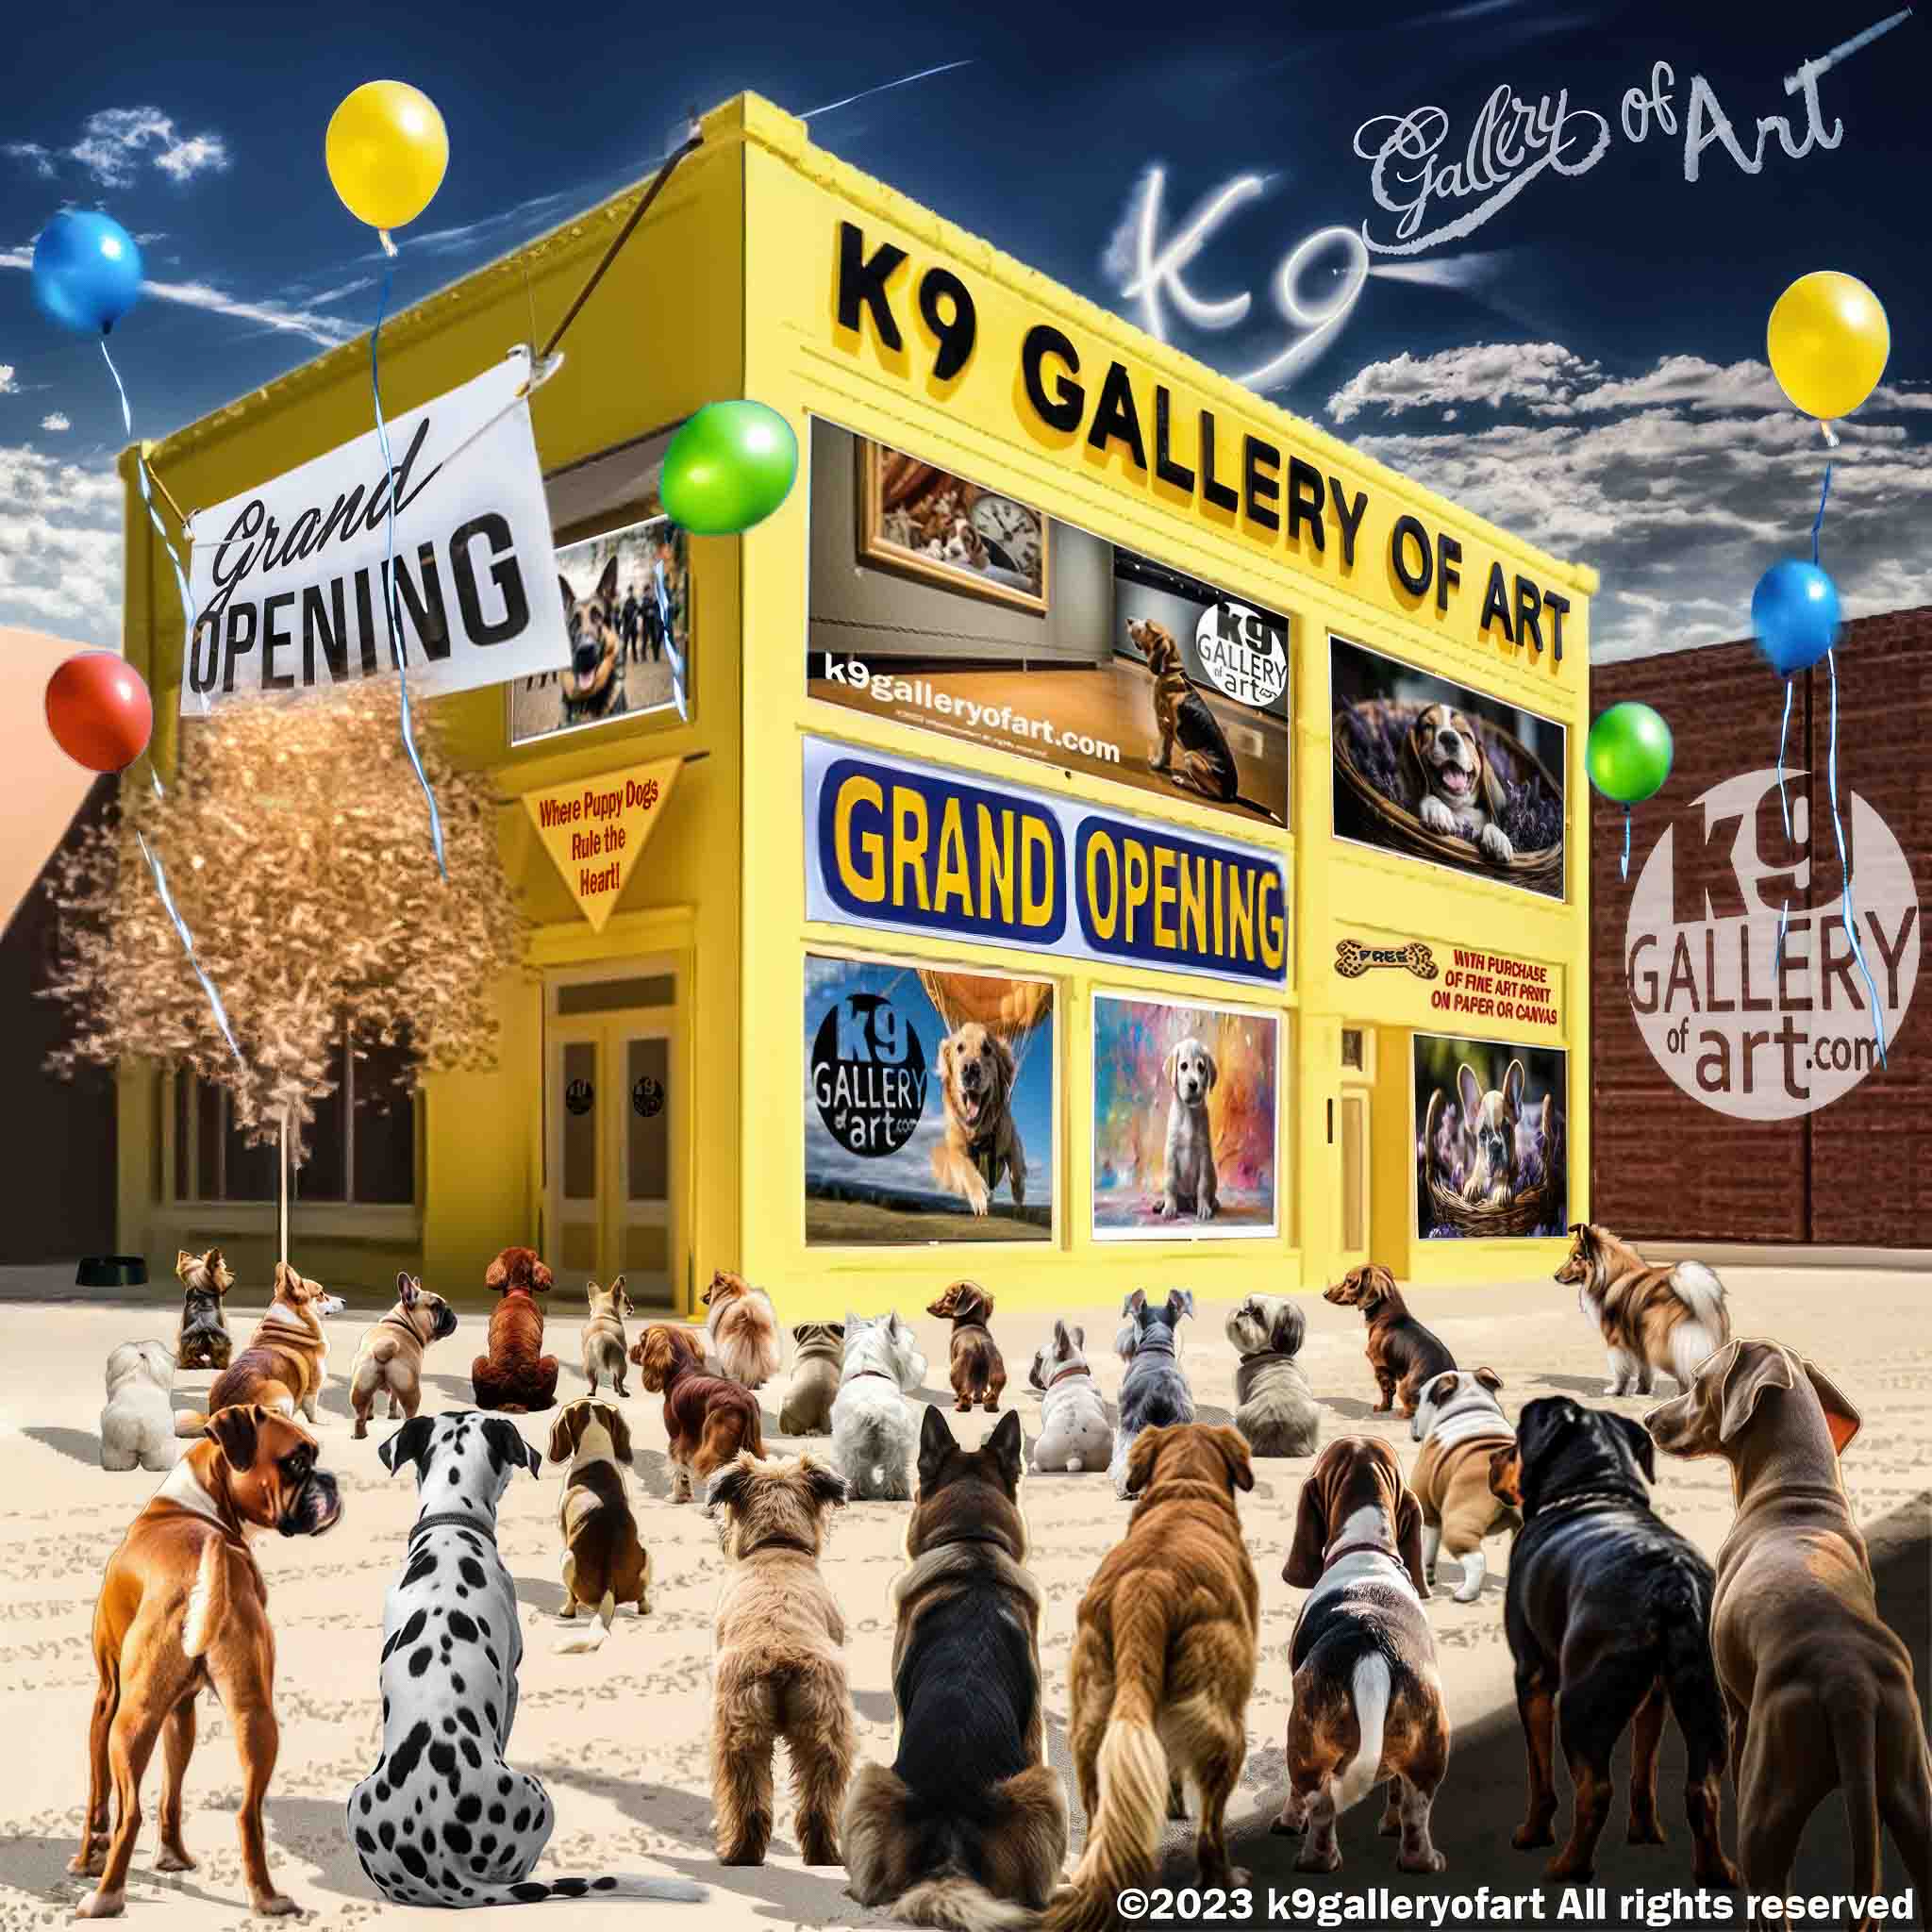 k9galleryofart Illustration of Yellow Building with Grand Opening Signing, Skywriting, Balloons, and all breeds of dogs sitting outside the building. k9 Gallery of Art Logo.